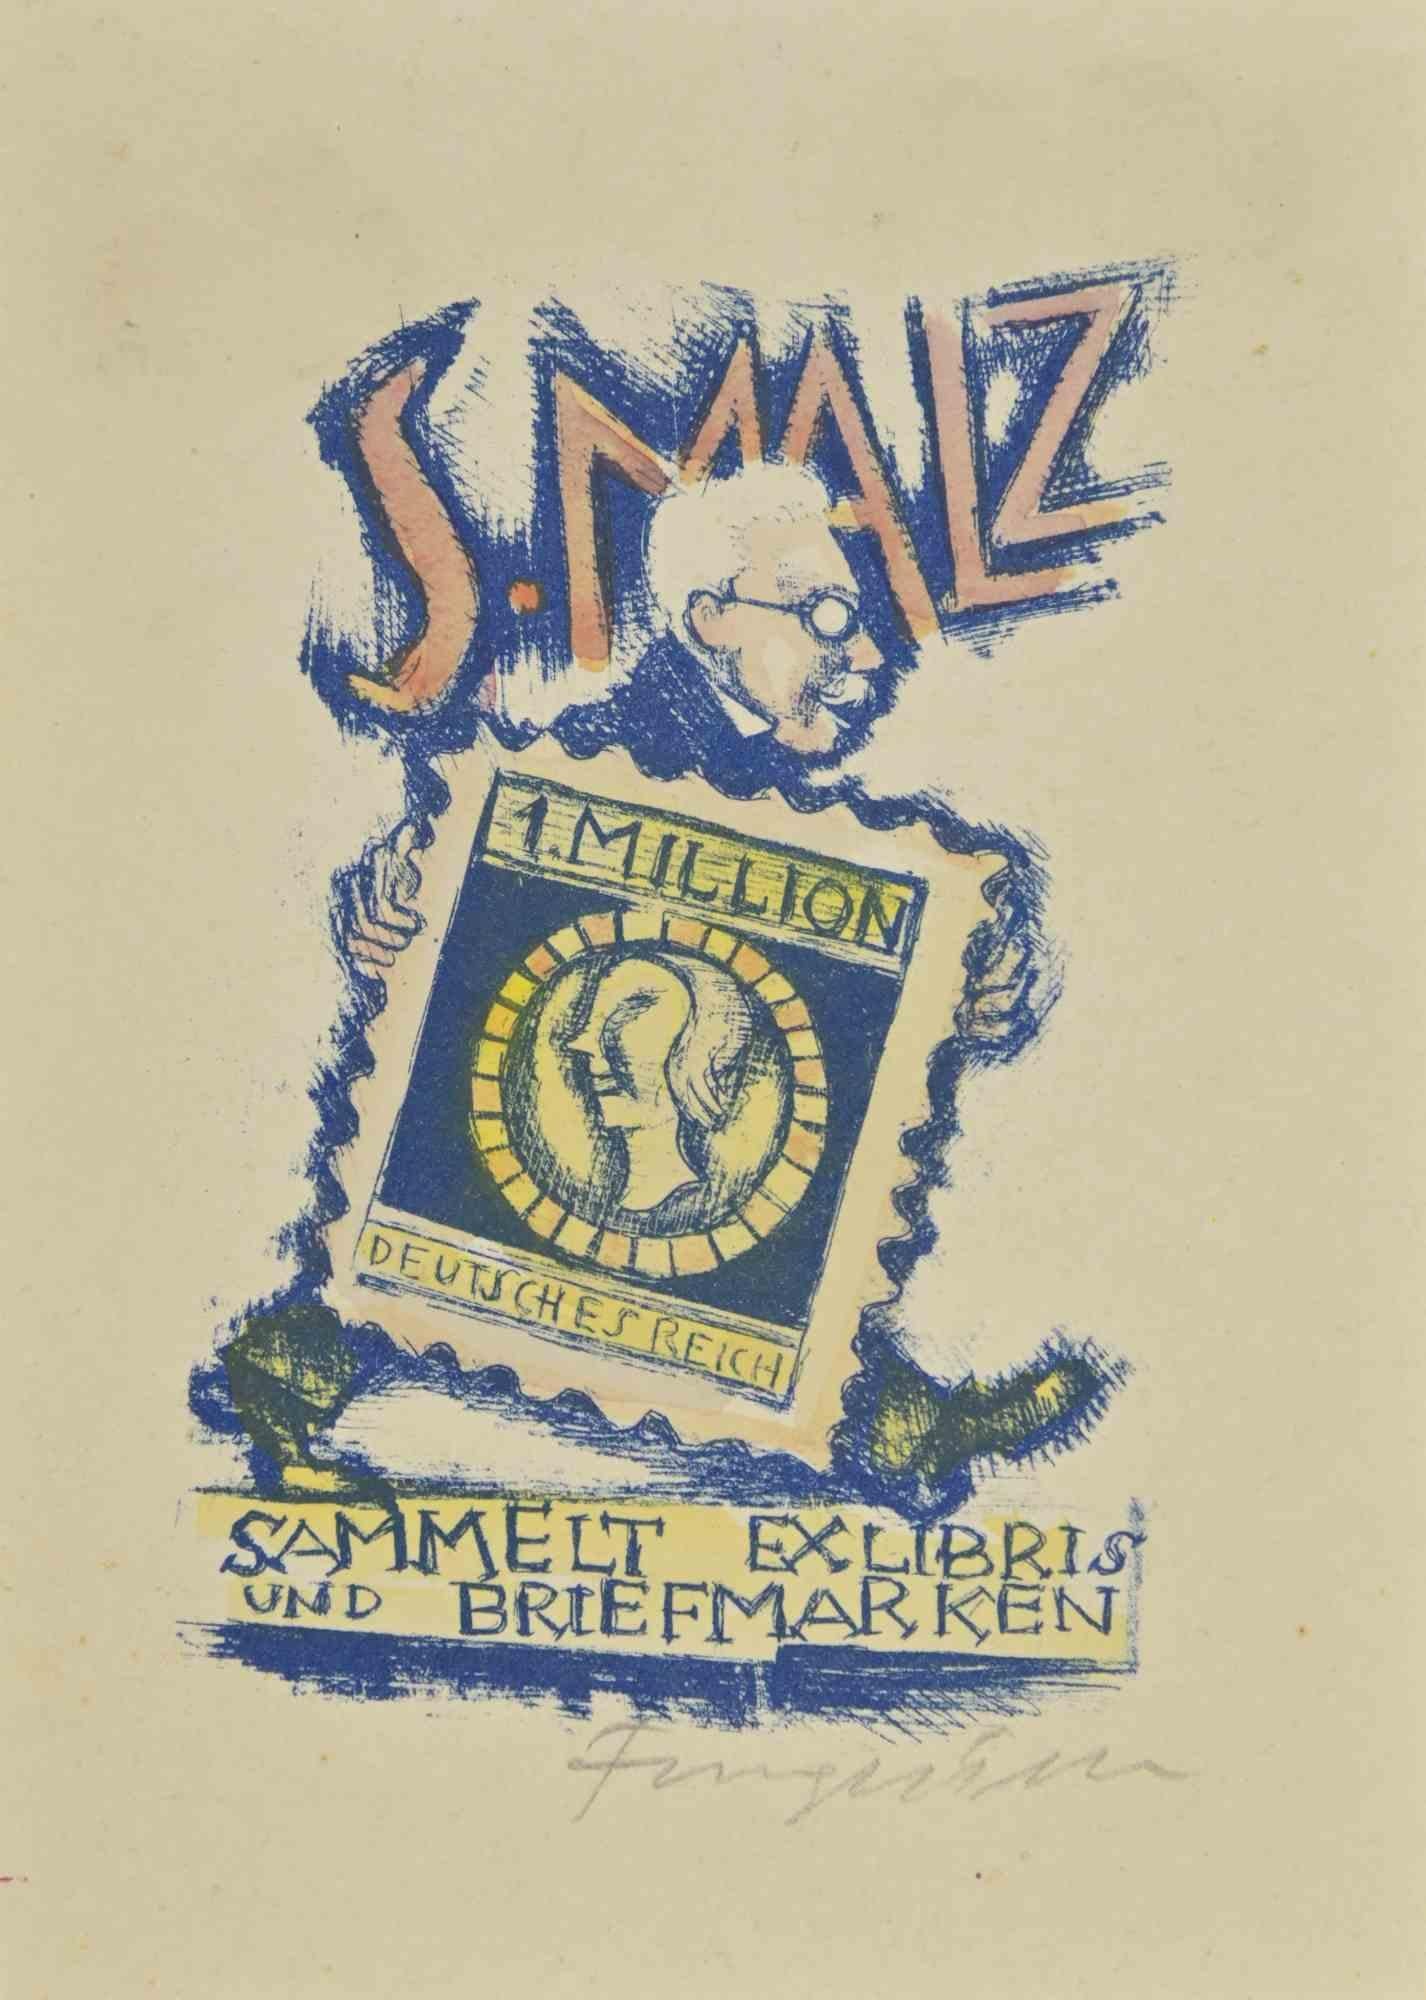 Ex Libris -Sammelt und Briefmarken is a  woodcut print created by Michel Fingesten.

Hand signed on the lower margin.

Good conditions.

Michel Fingesten (1884 - 1943) was a Czech painter and engraver of Jewish origin. He is considered one of the